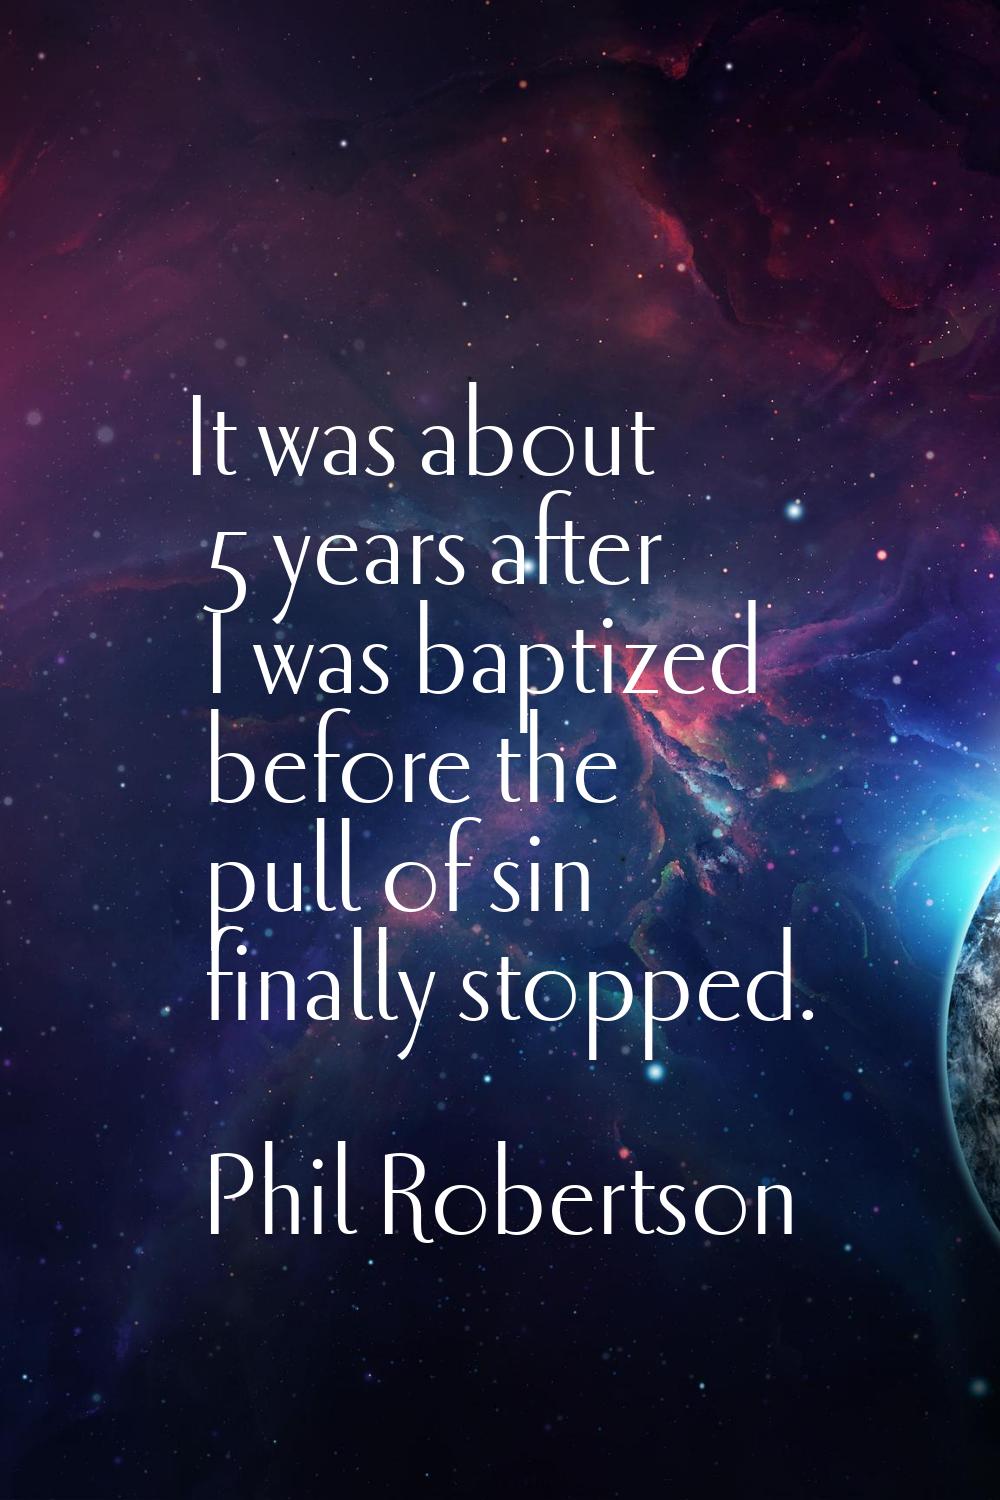 It was about 5 years after I was baptized before the pull of sin finally stopped.